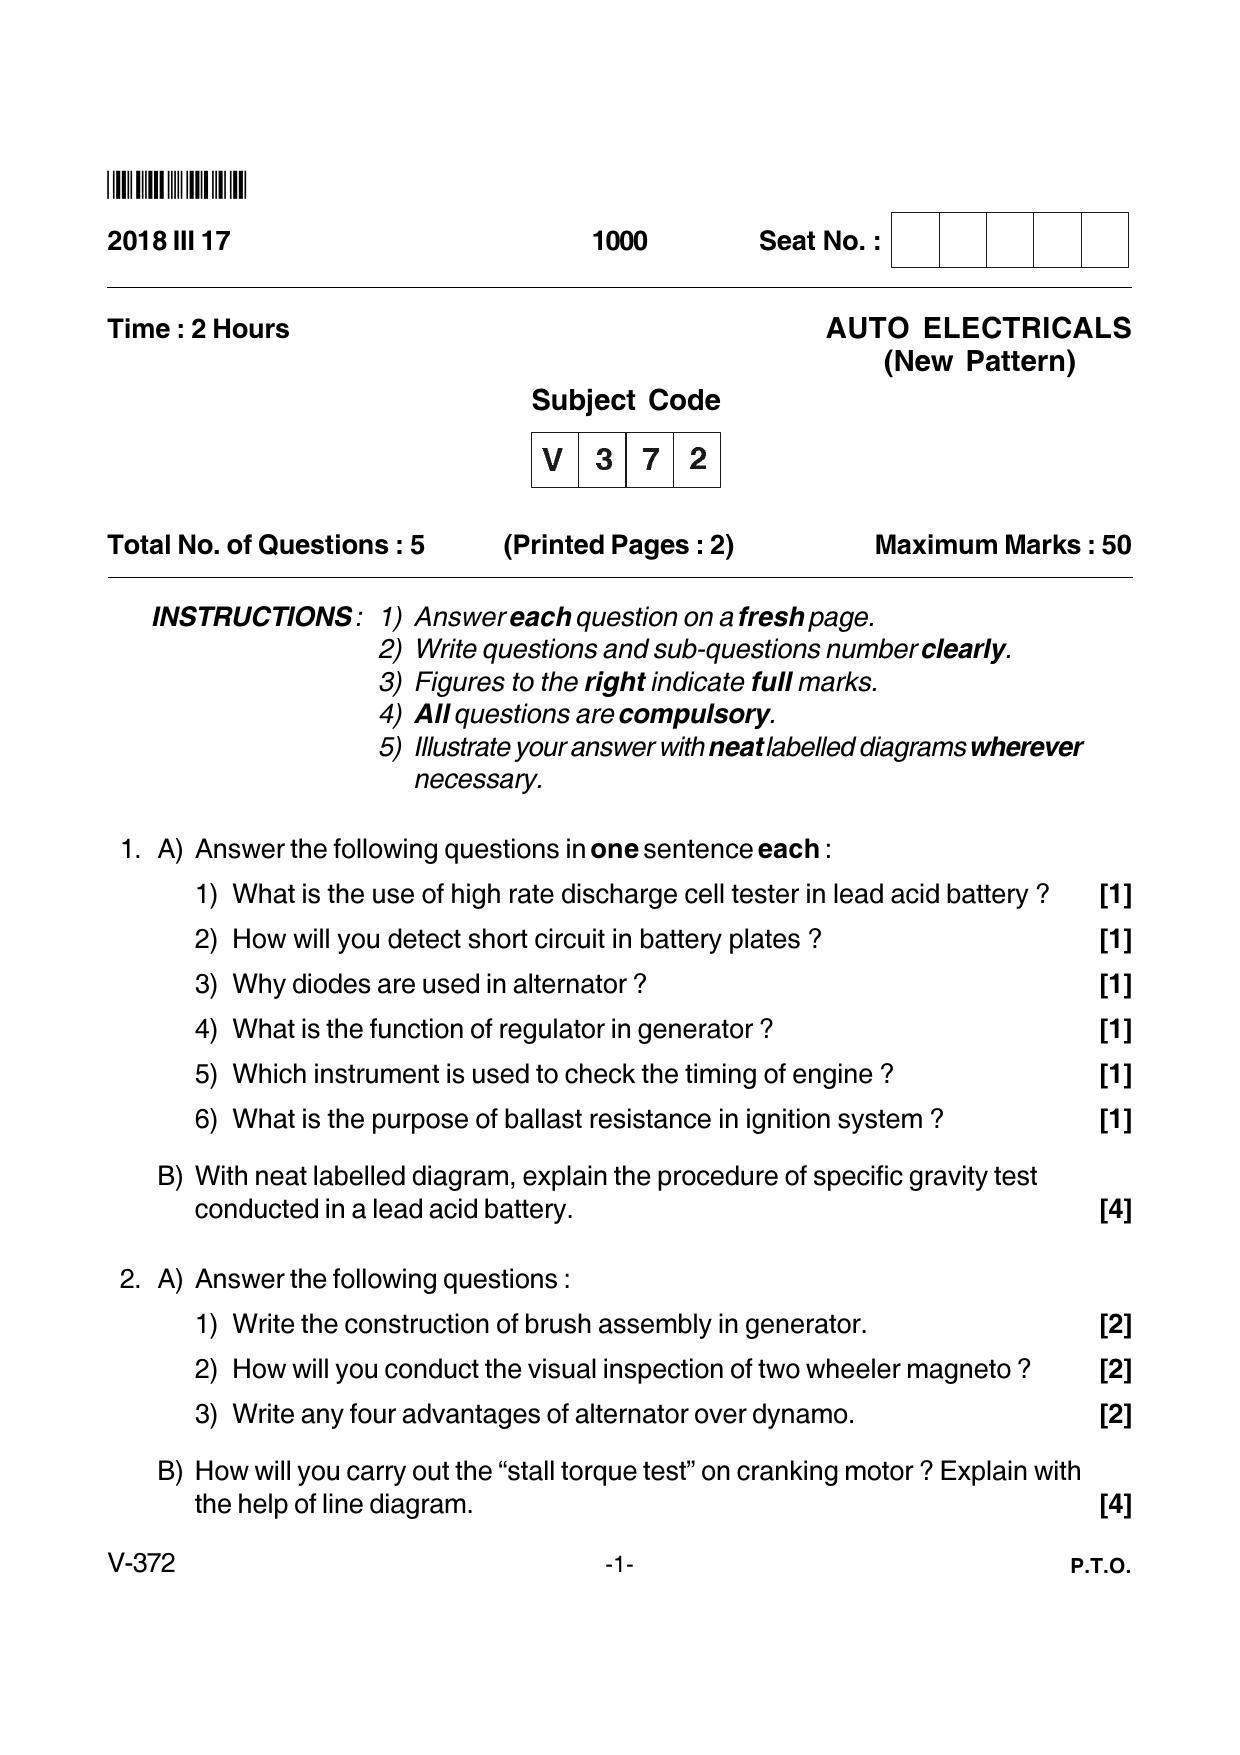 Goa Board Class 12 Auto Electricals  Voc 372 New Pattern (March 2018) Question Paper - Page 1